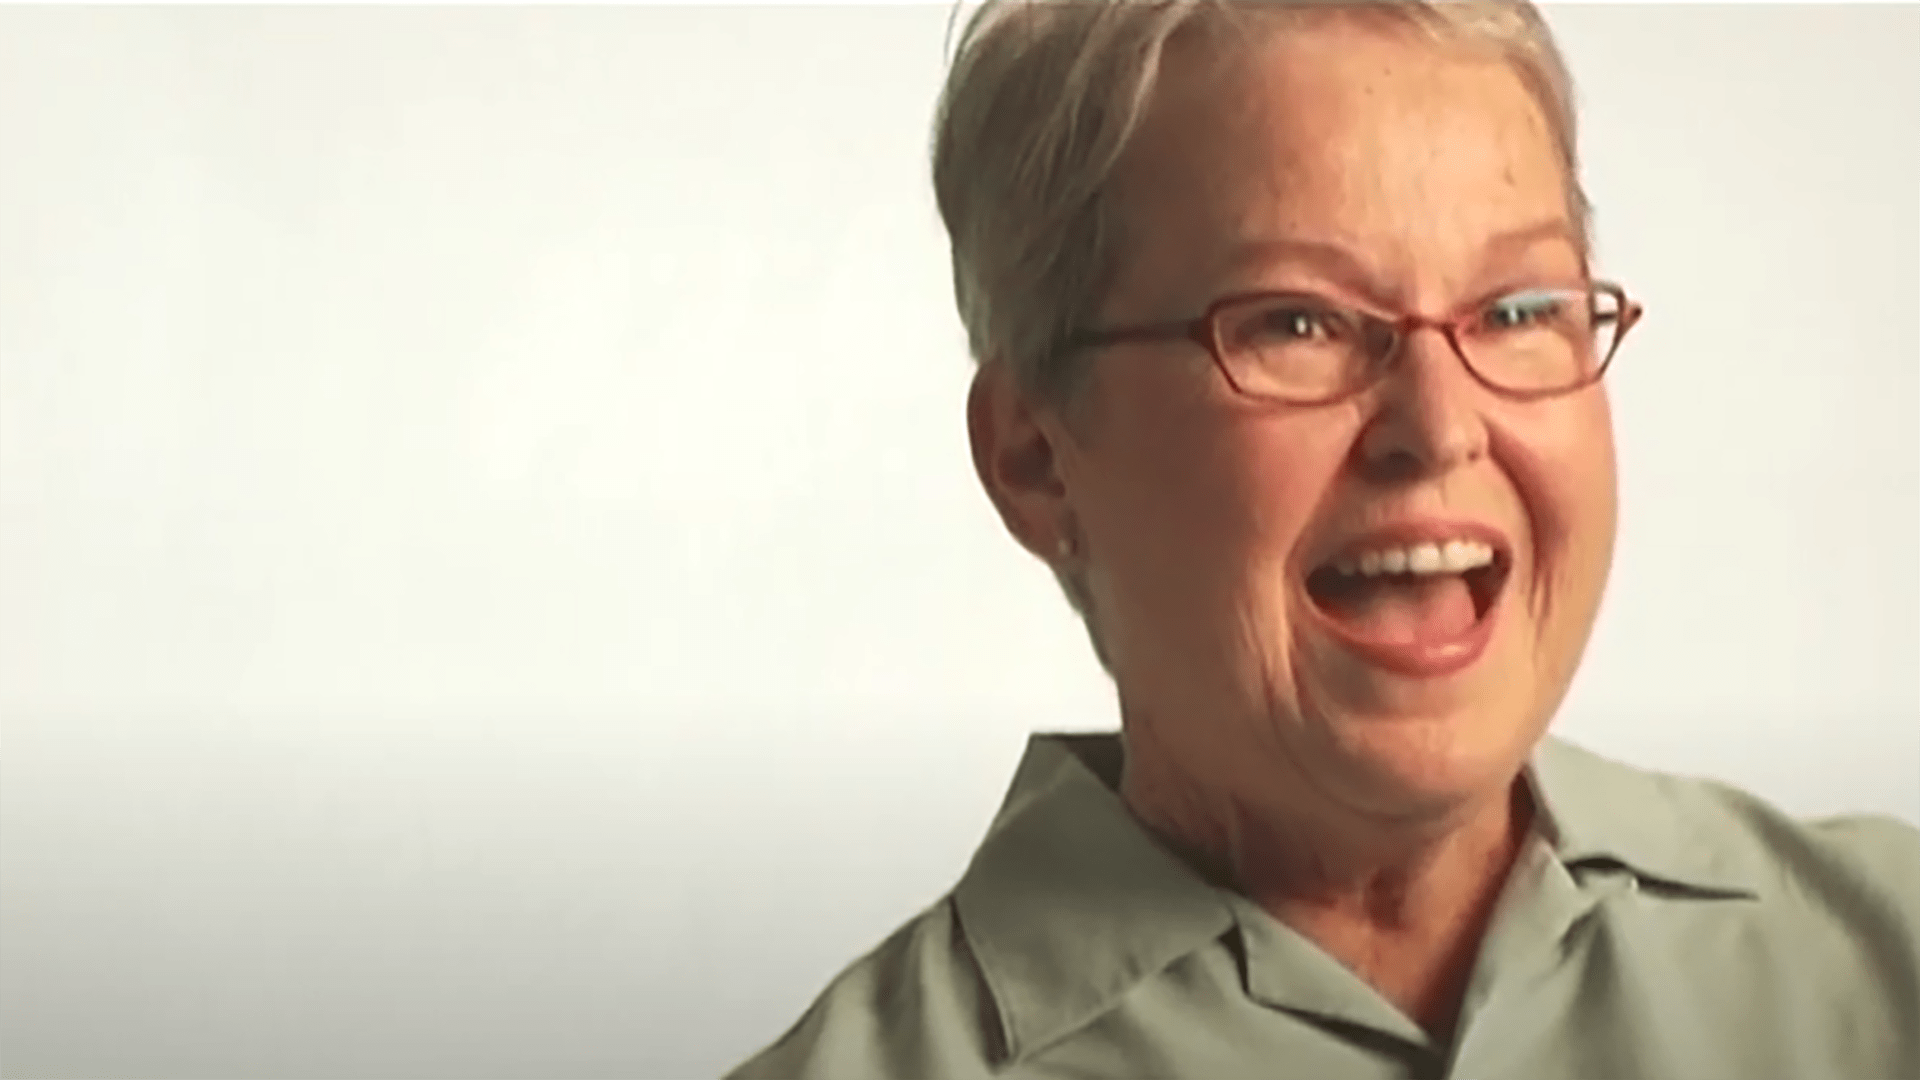 A smiling senior woman with short gray hair wearing glasses and a light green button-up shirt